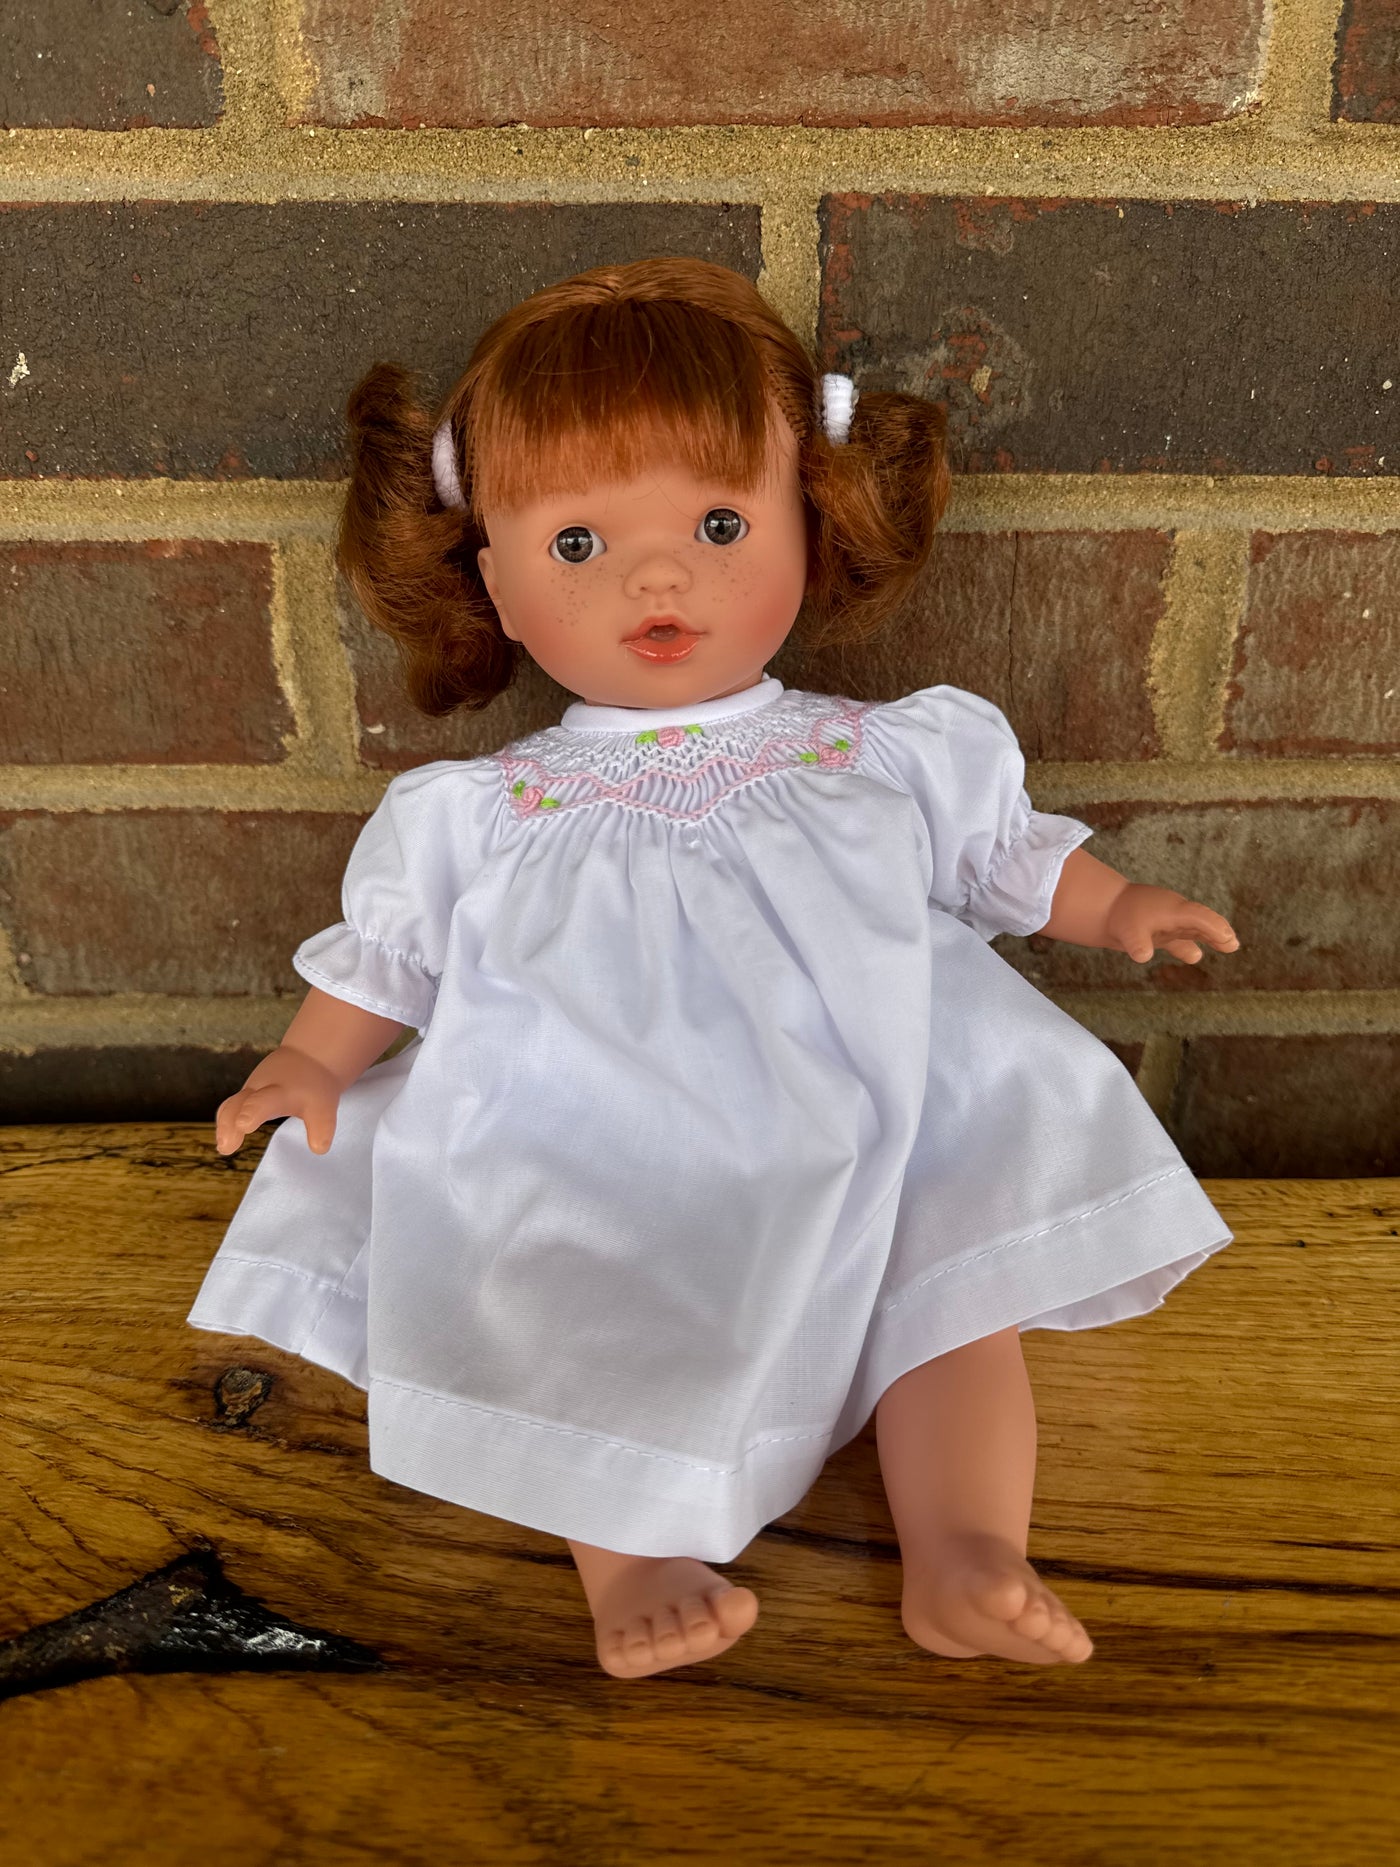 Holly 10" Doll w/ Red Pigtails BR Eyes - White Dress